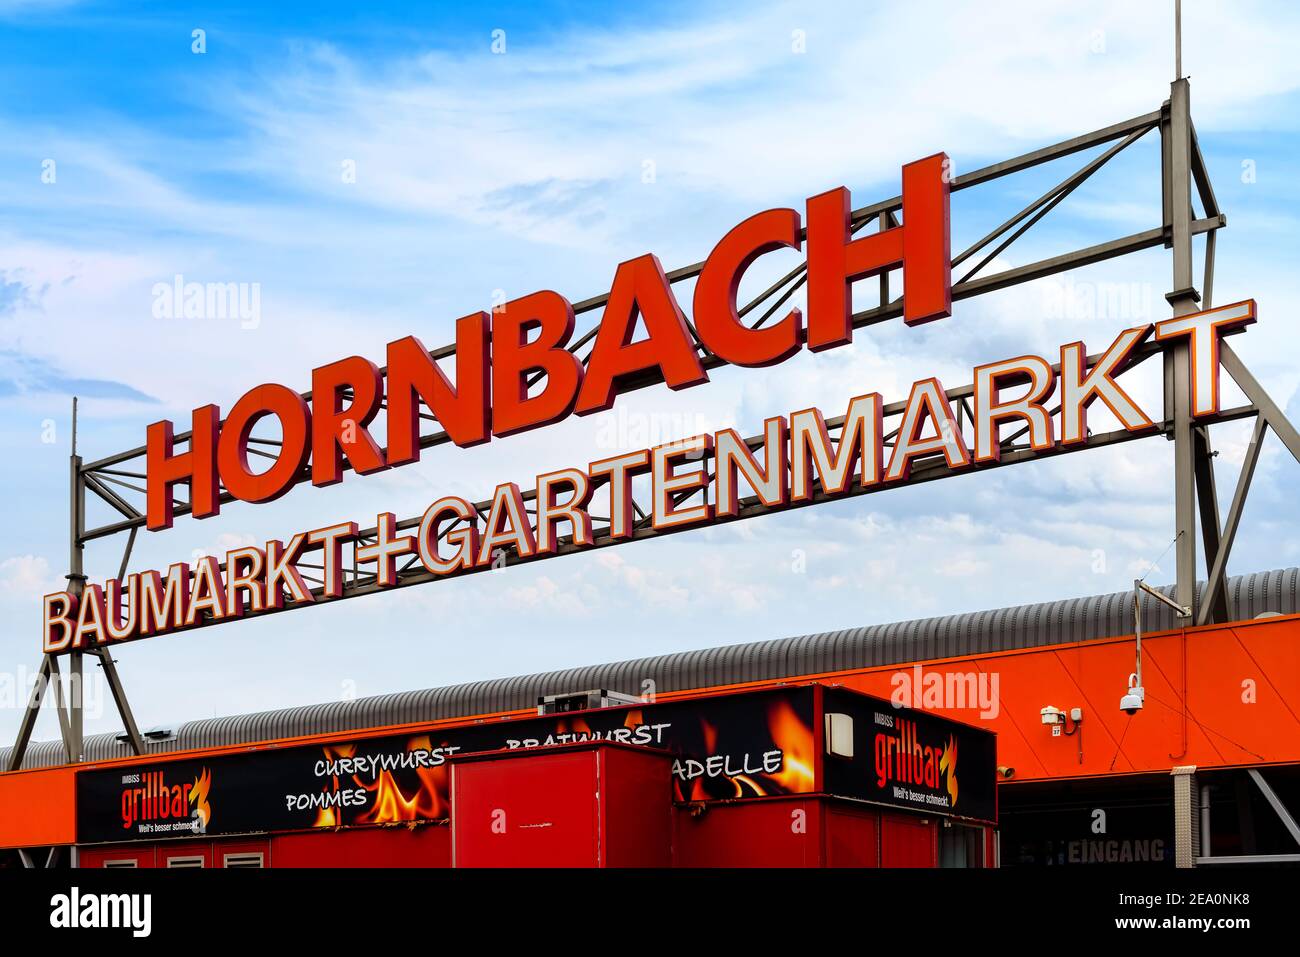 Koblenz, Germany, 01.31.2021: Hornbach hardware store. Hornbach is a German DIY-store chain offering home improvement and do-it-yourself goods. Stock Photo